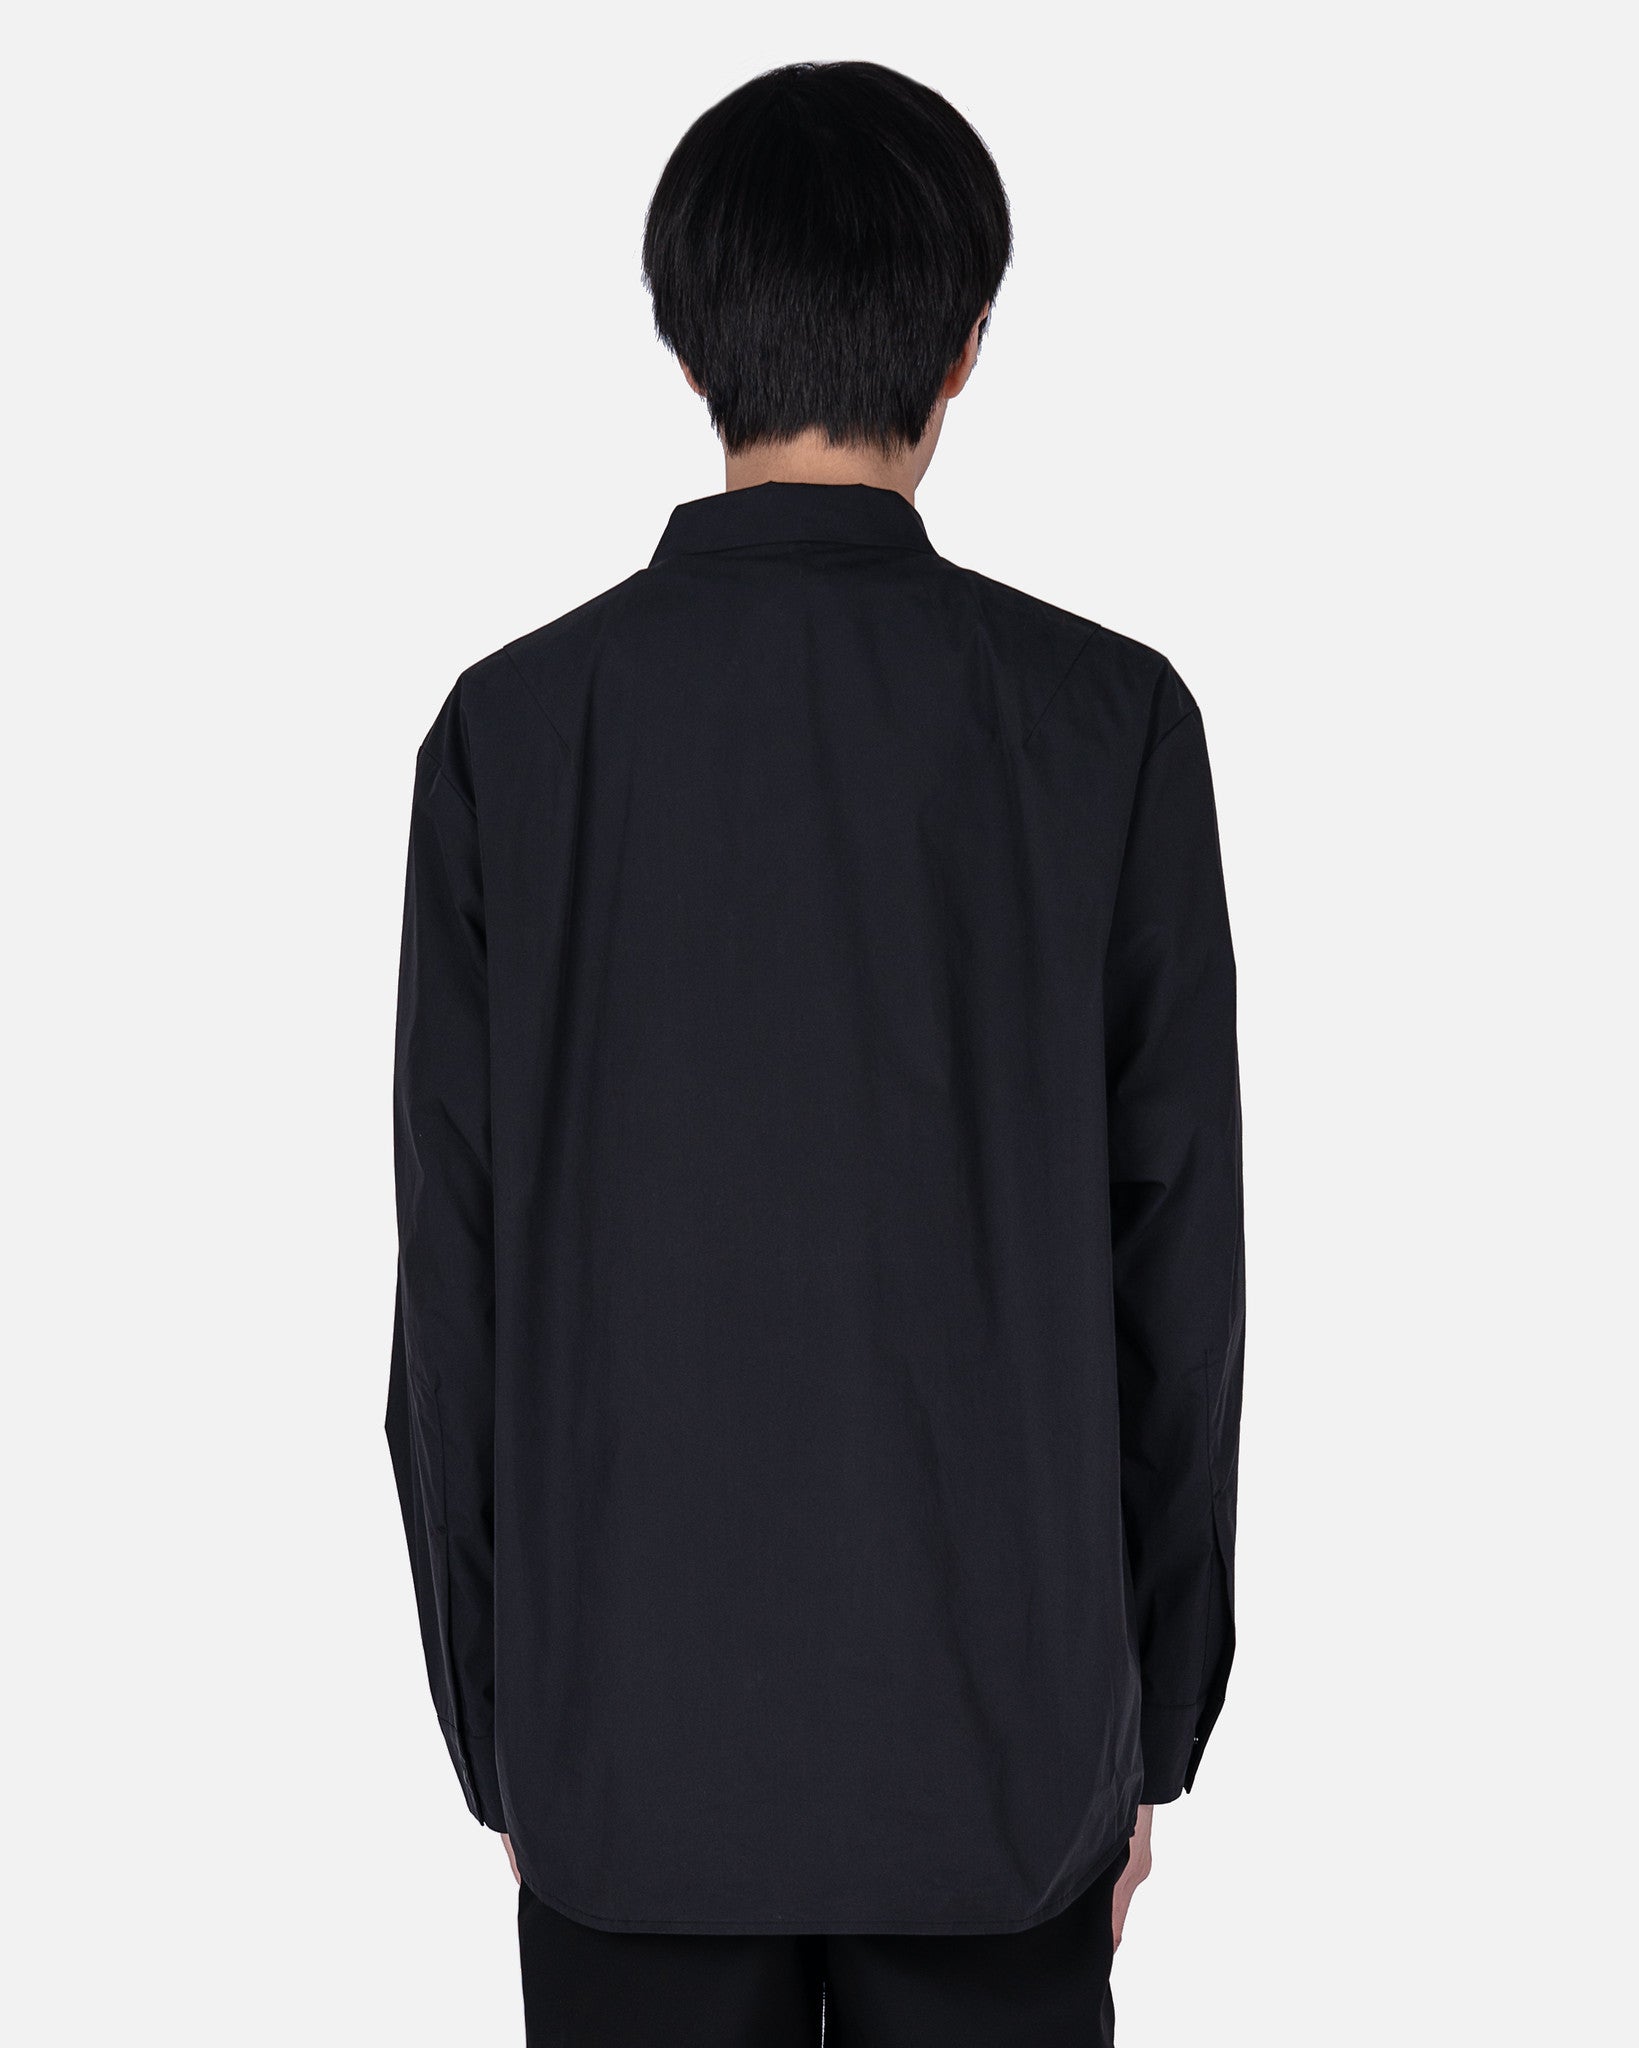 POST ARCHIVE FACTION (P.A.F) Men's Shirts 5.0 Shirt Center in Black